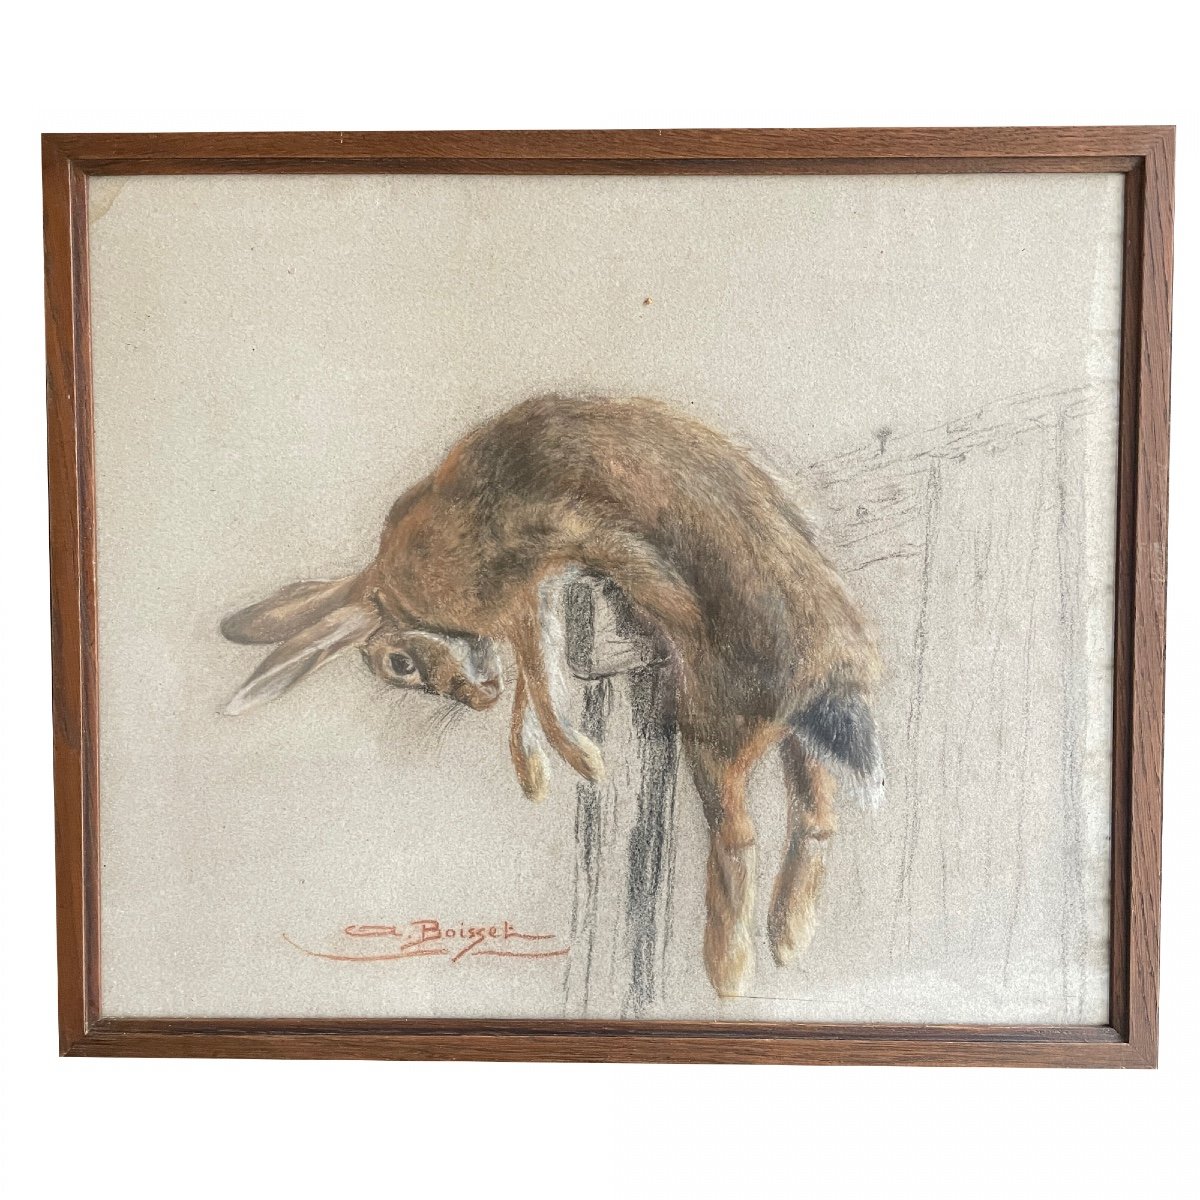 Pastel The Hare, Signed A. Boisset